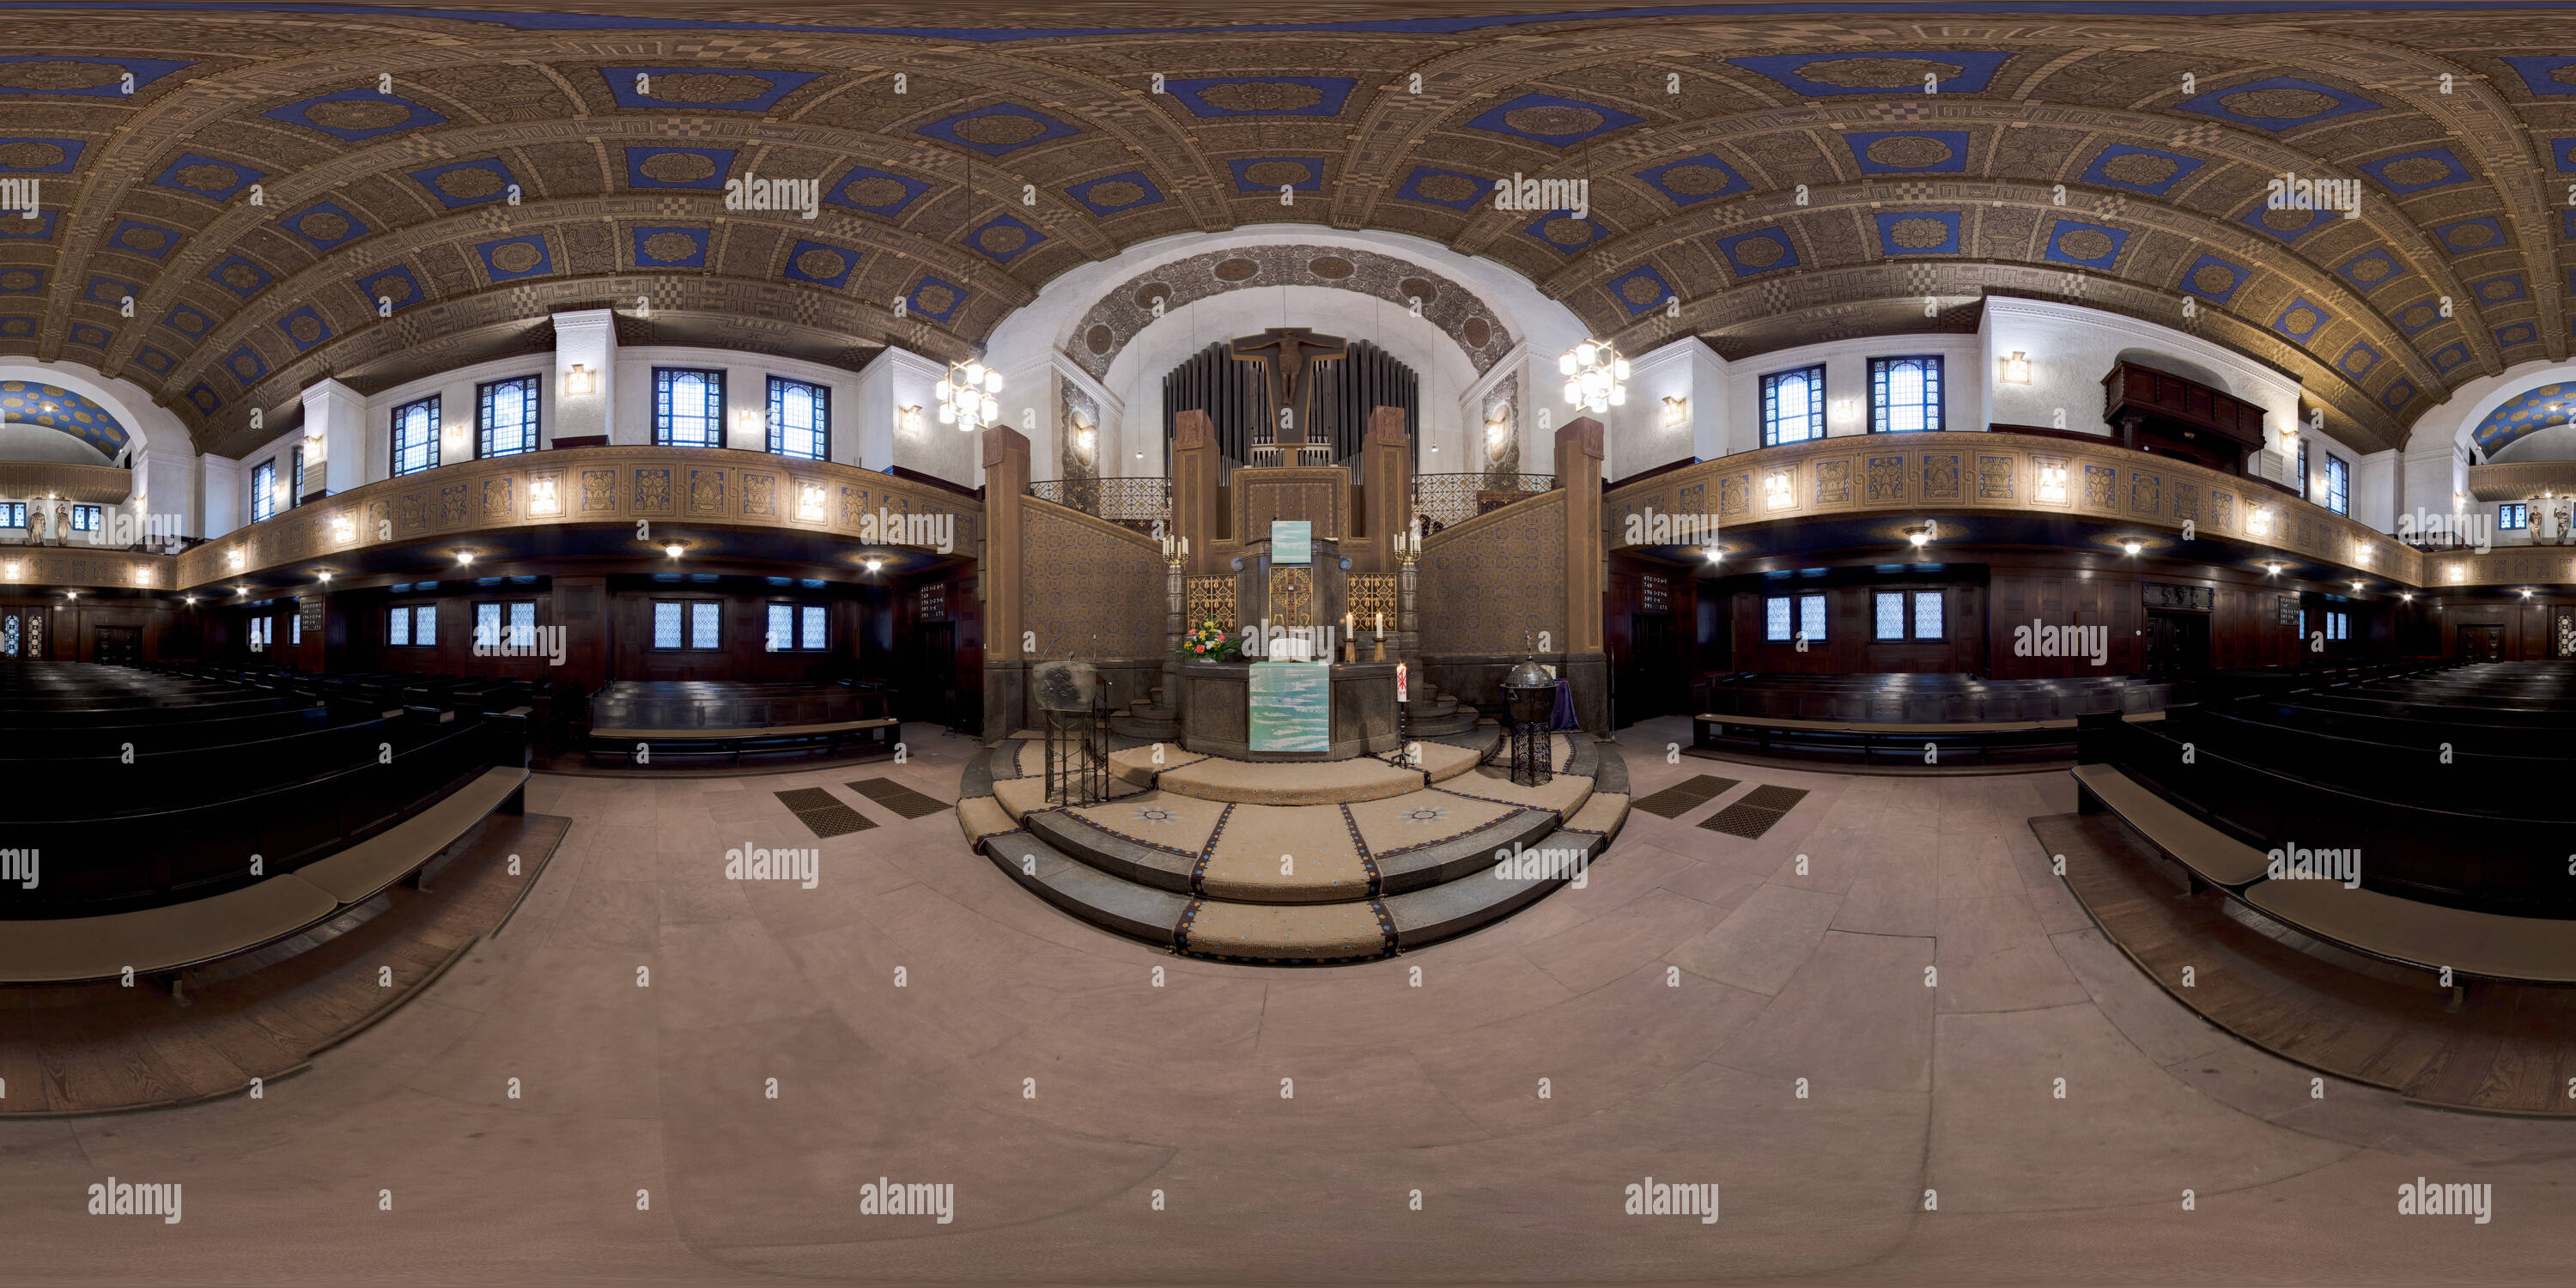 360 degree panoramic view of Lutherkirche Worms, Sanctuary And Organ, 2017-02